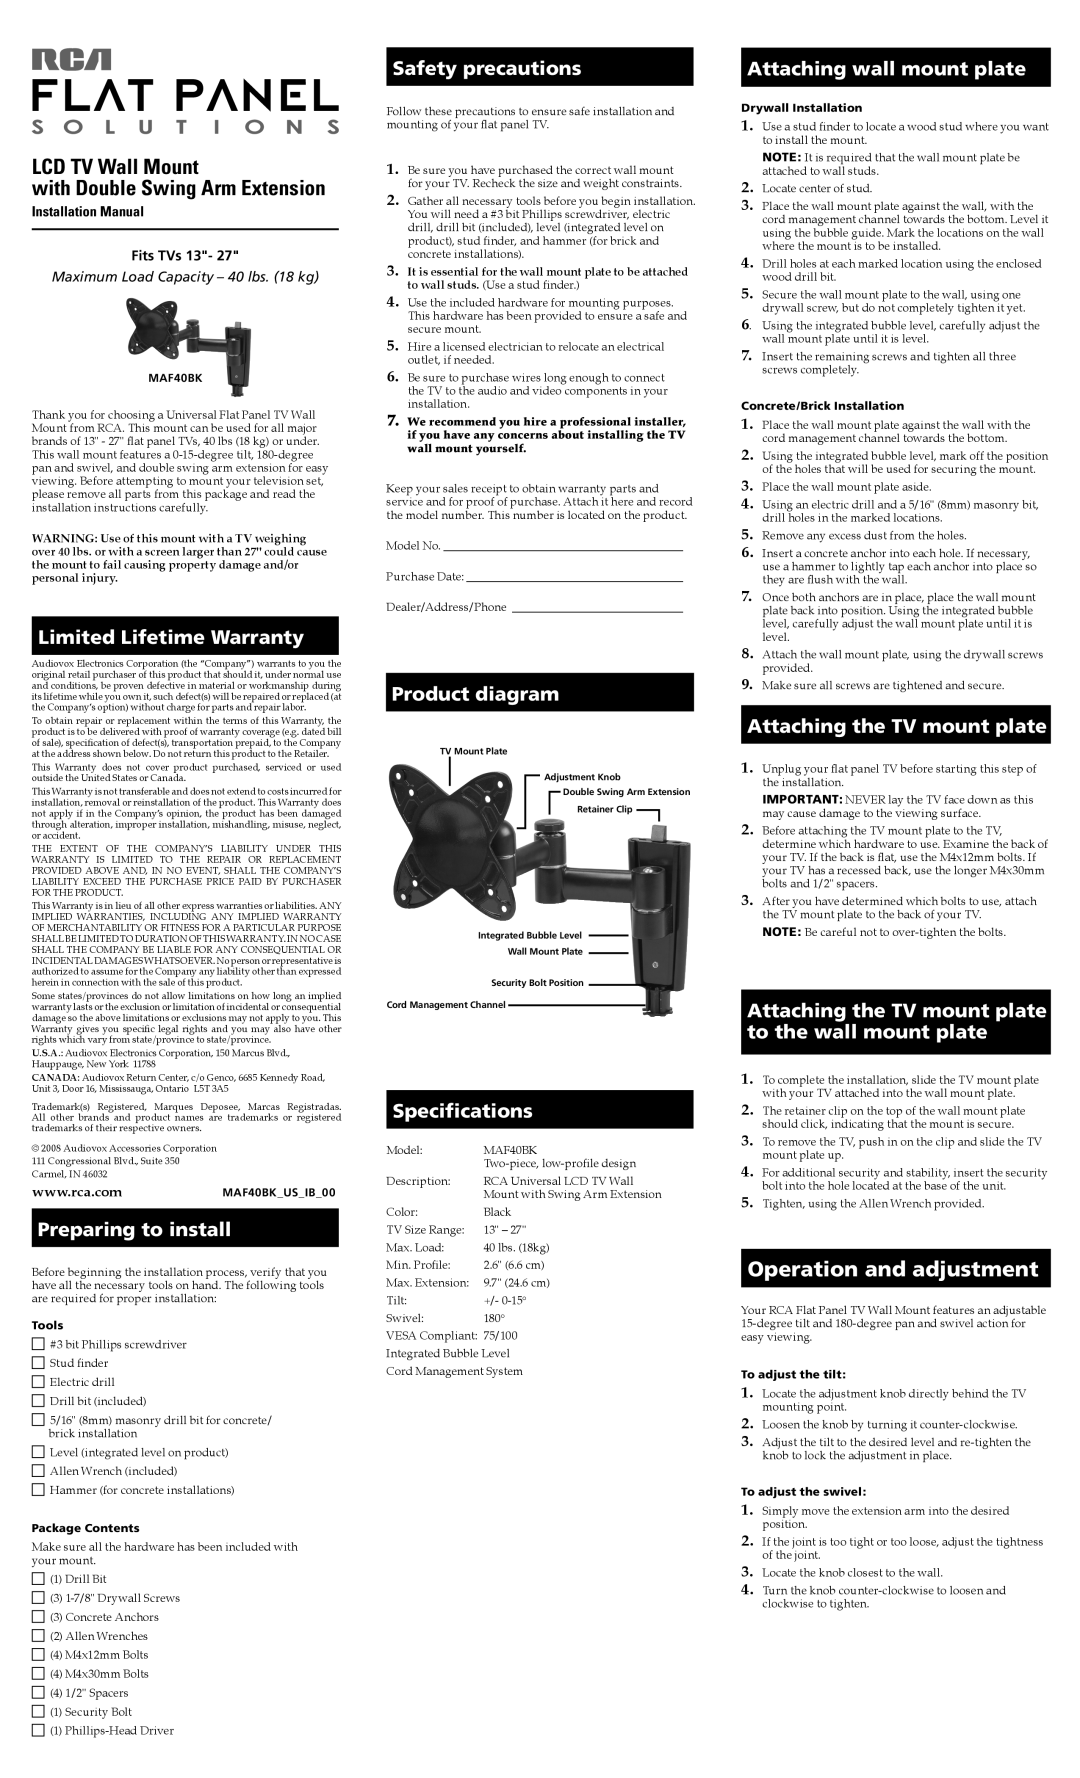 RCA MAF40BK installation manual Limited Lifetime Warranty, Preparing to install, Safety precautions, Product diagram 